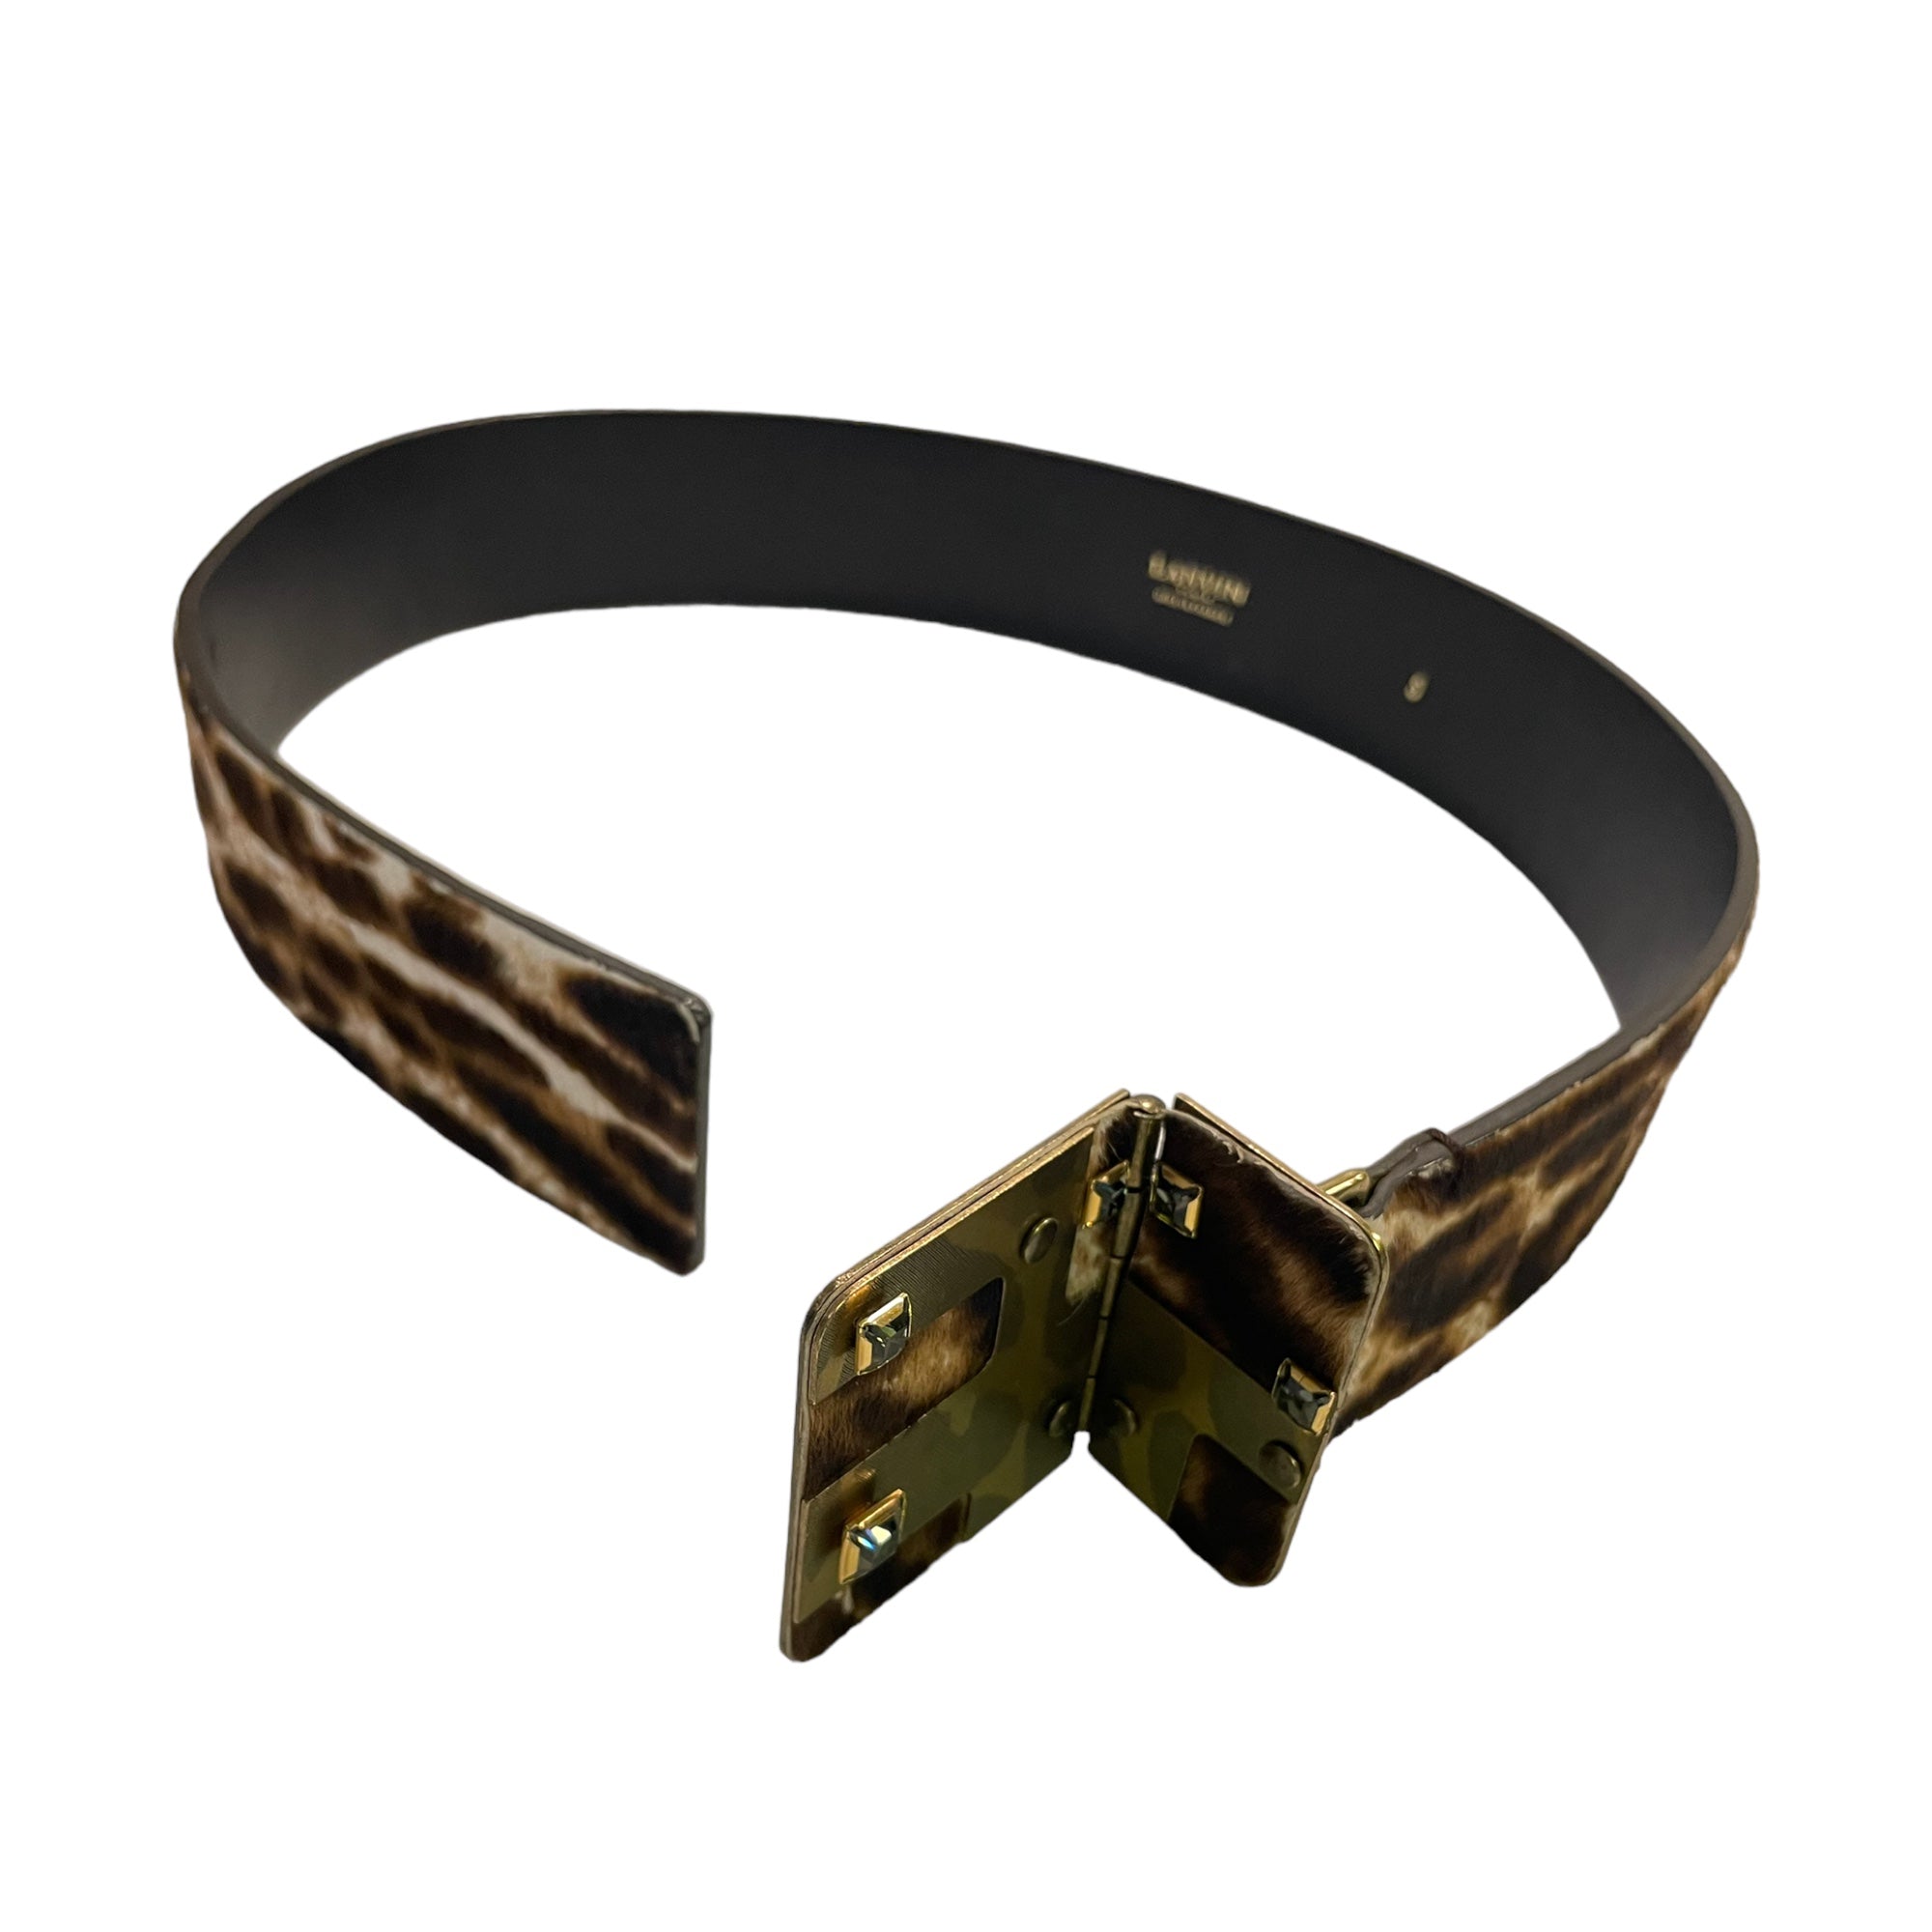 LANVIN Calf Hair Waist Belt with Antique Gold and Crystal Buckle |Size: Small|